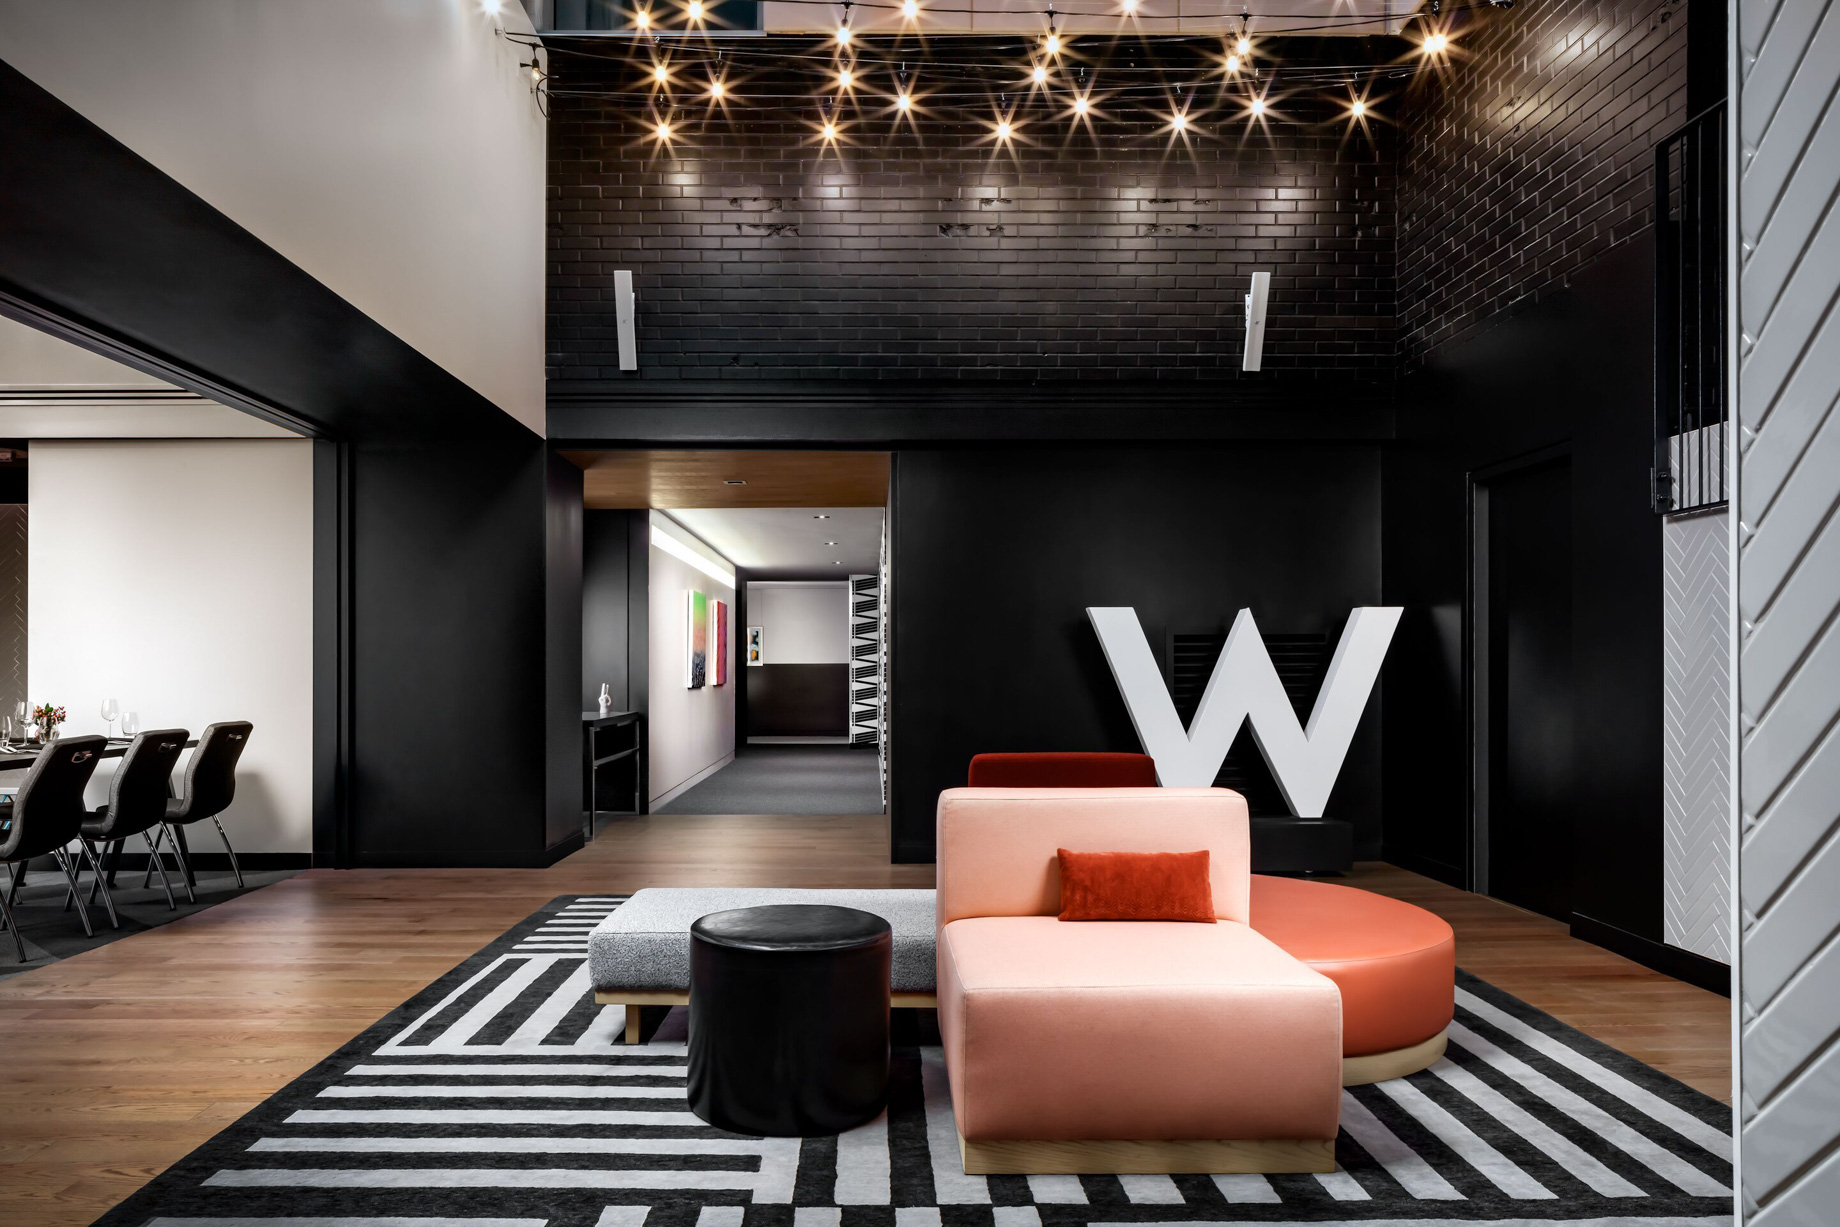 W Montreal Hotel – Montreal, Quebec, Canada – The Alley Prefunction Space